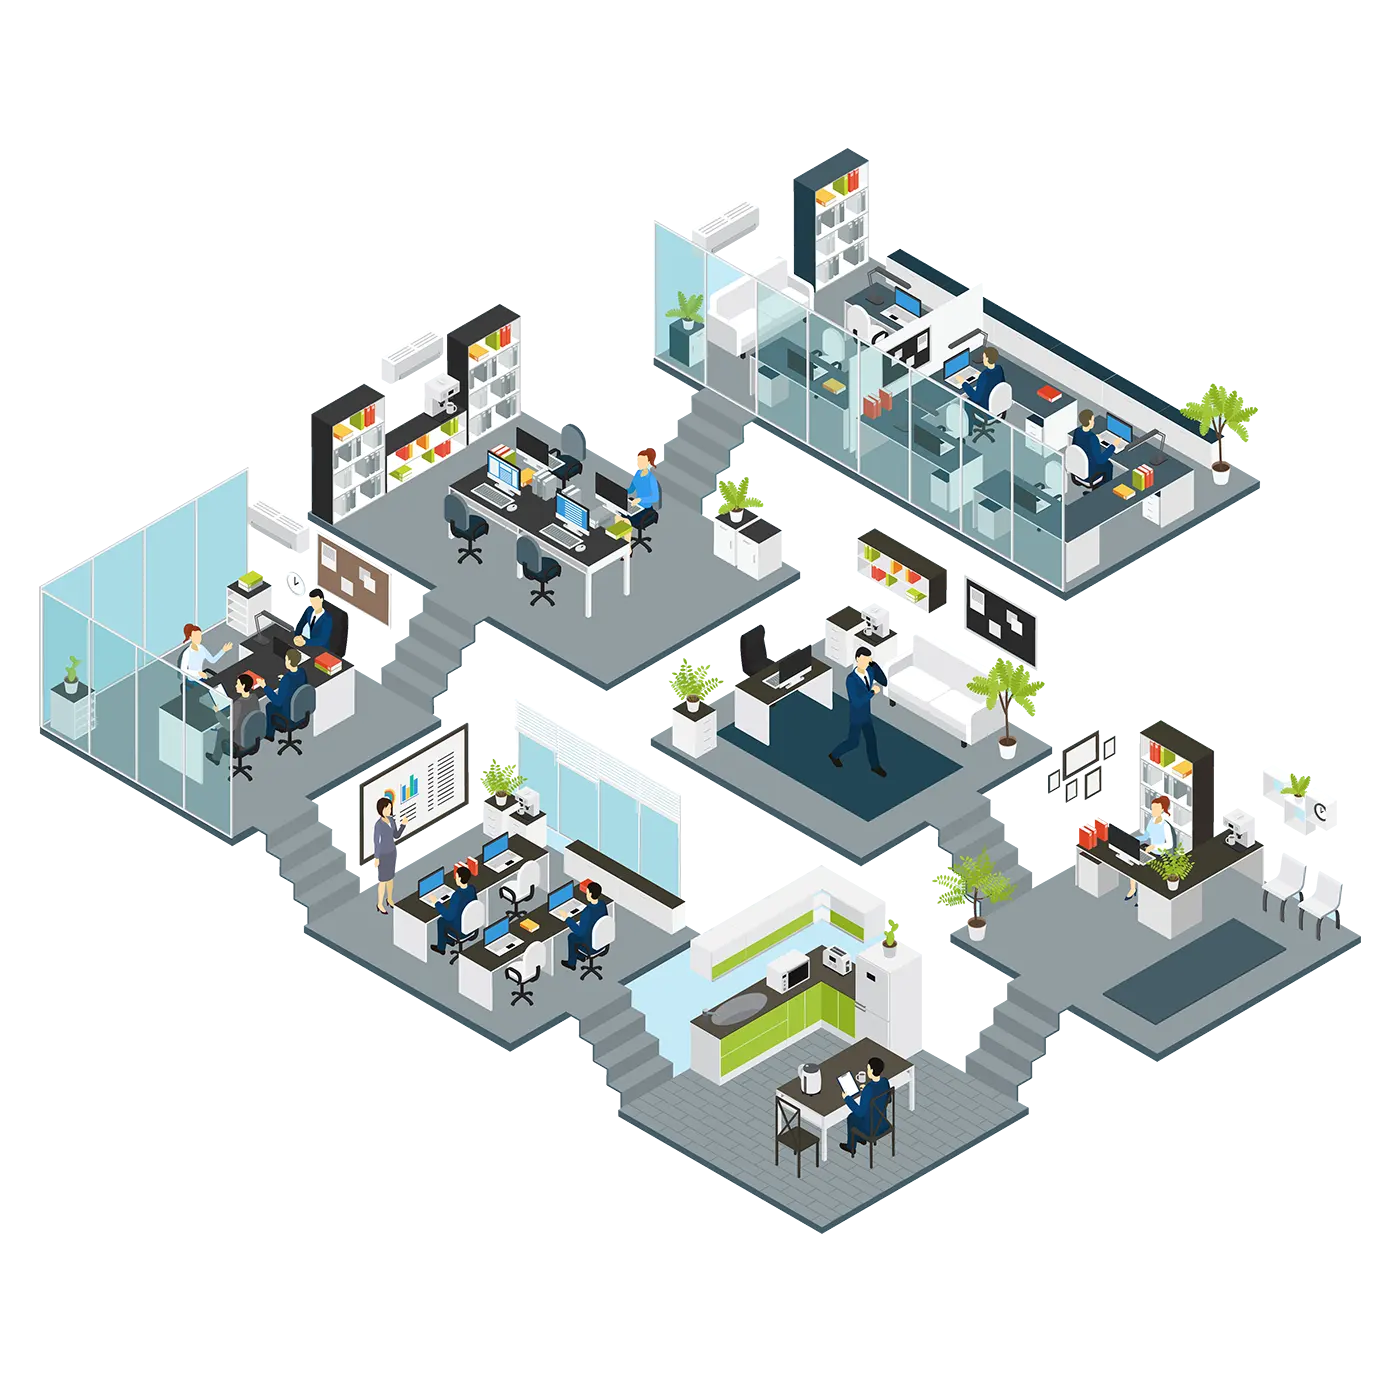 Illustration of an isometric office